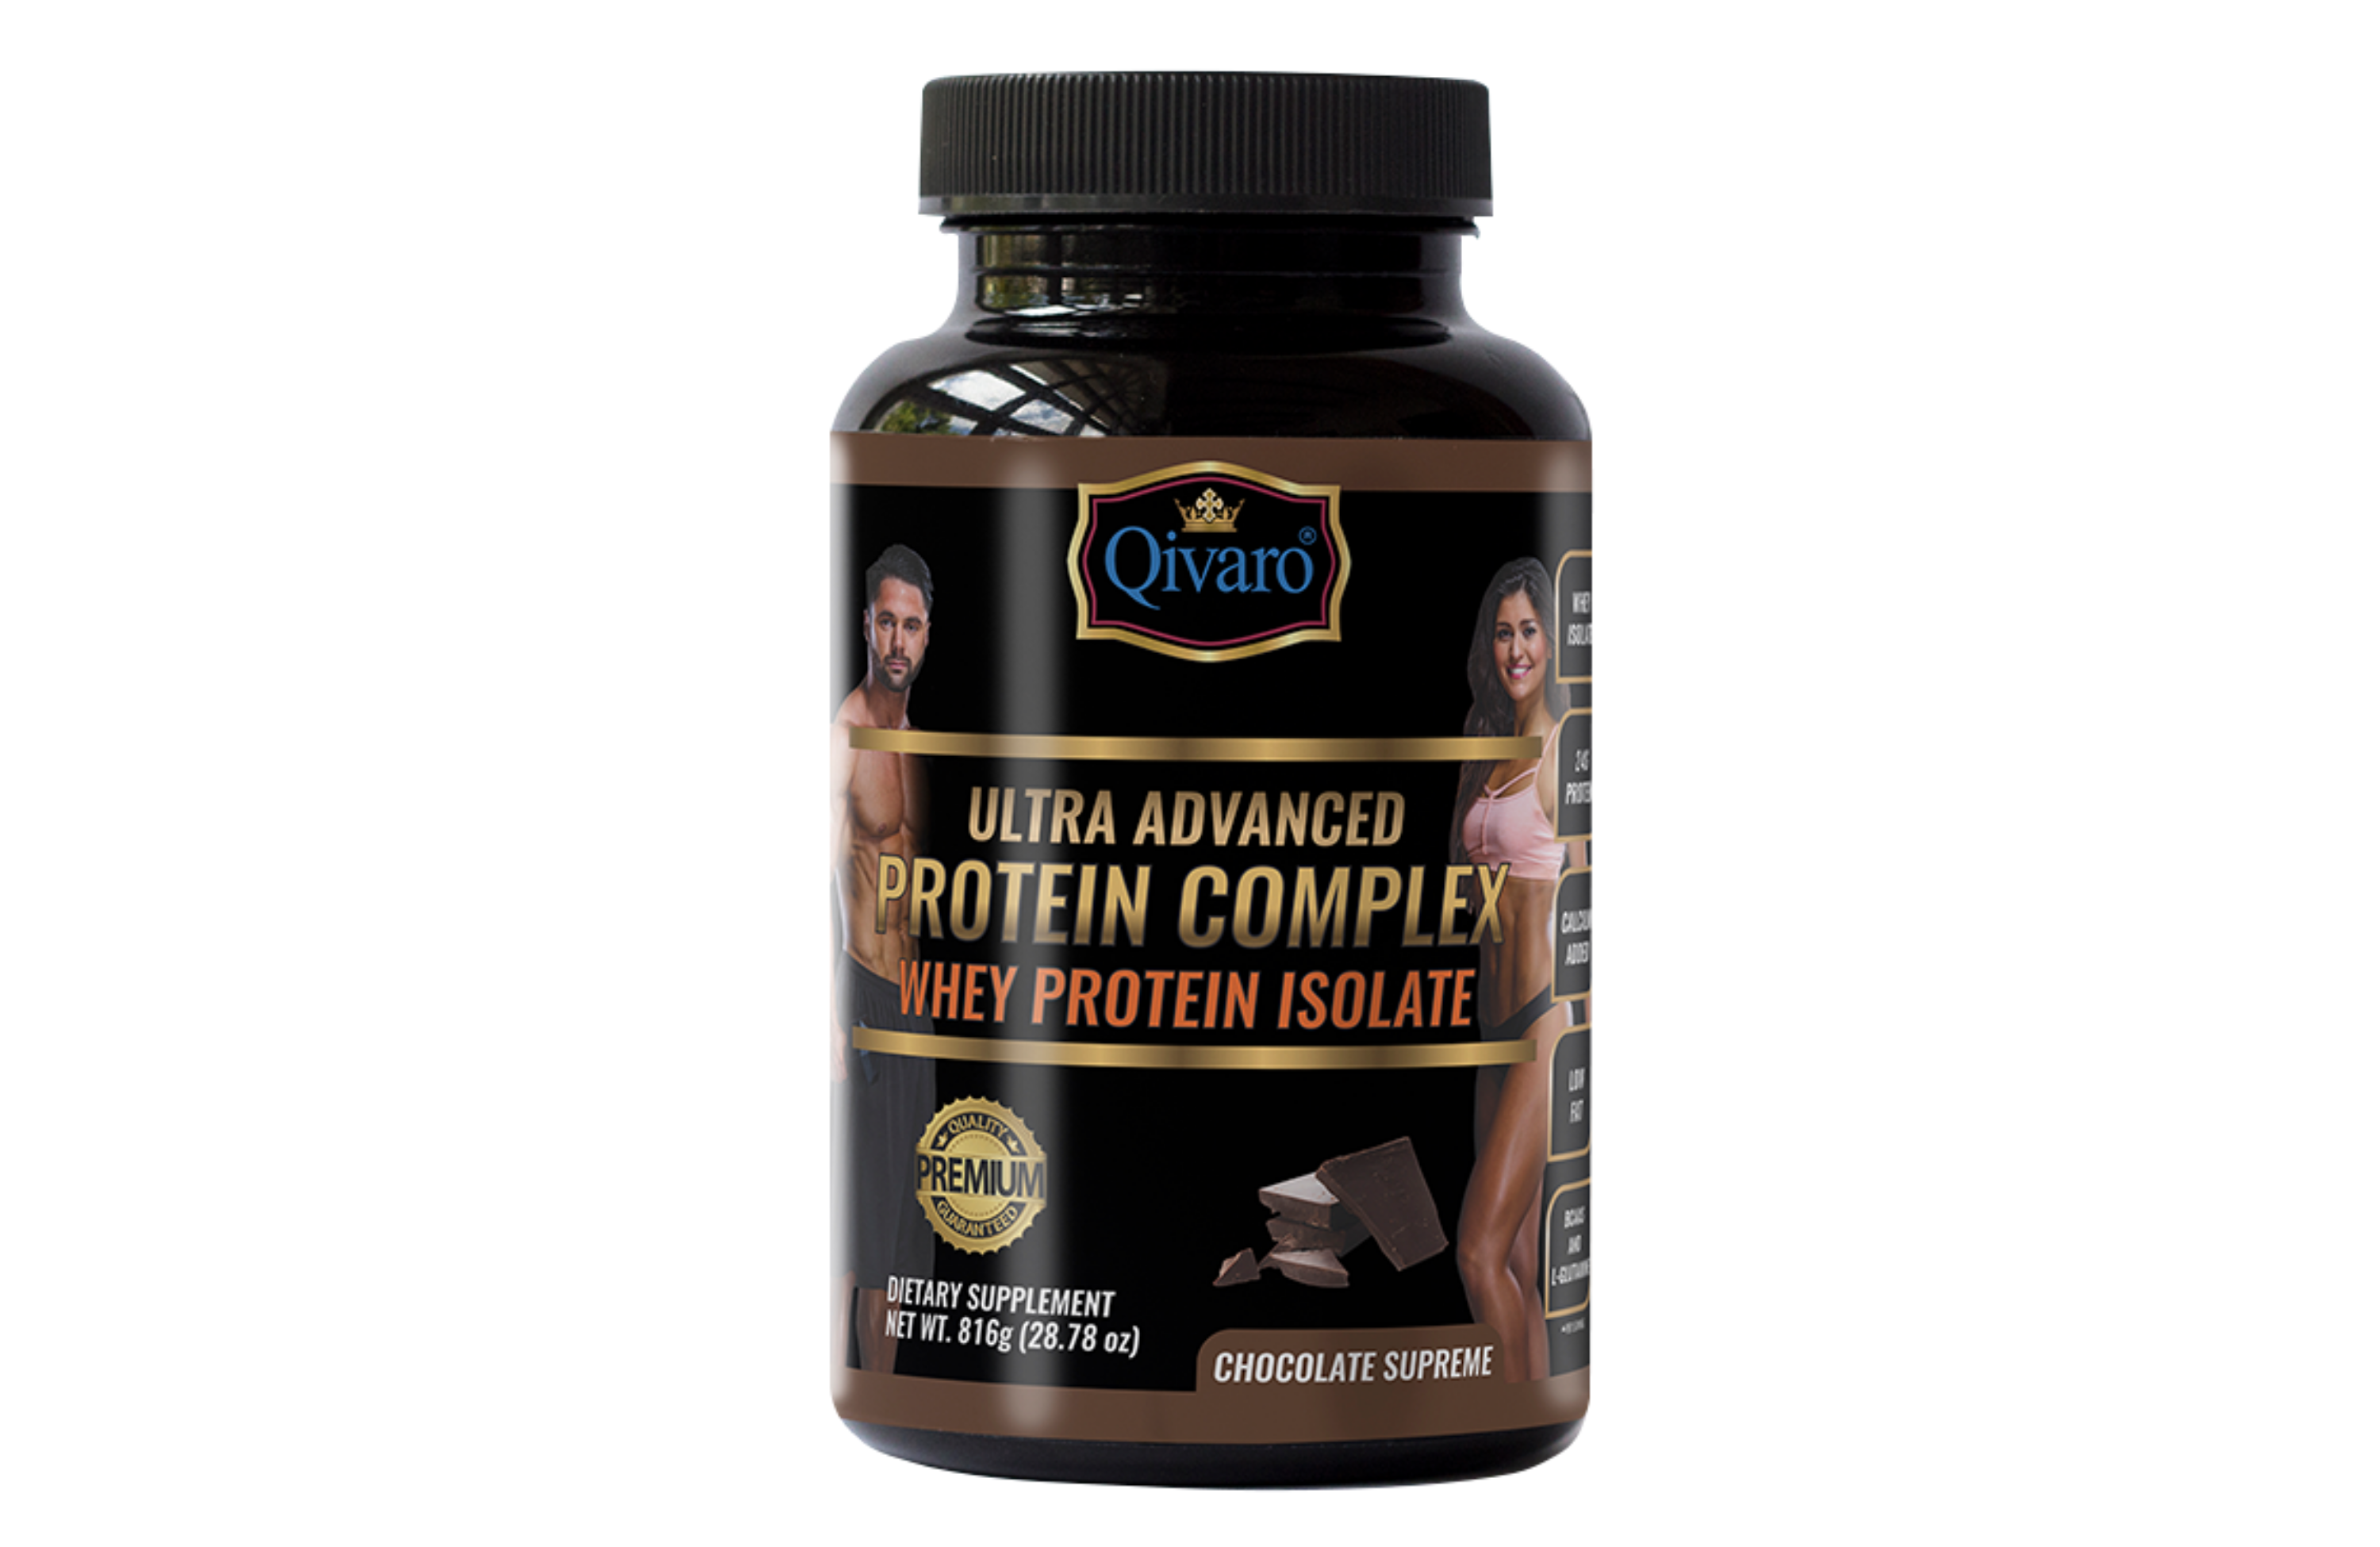 QPC02B - Ultra Advanced Protein Complex Whey Protein Isolate (Chocolate) - 816g